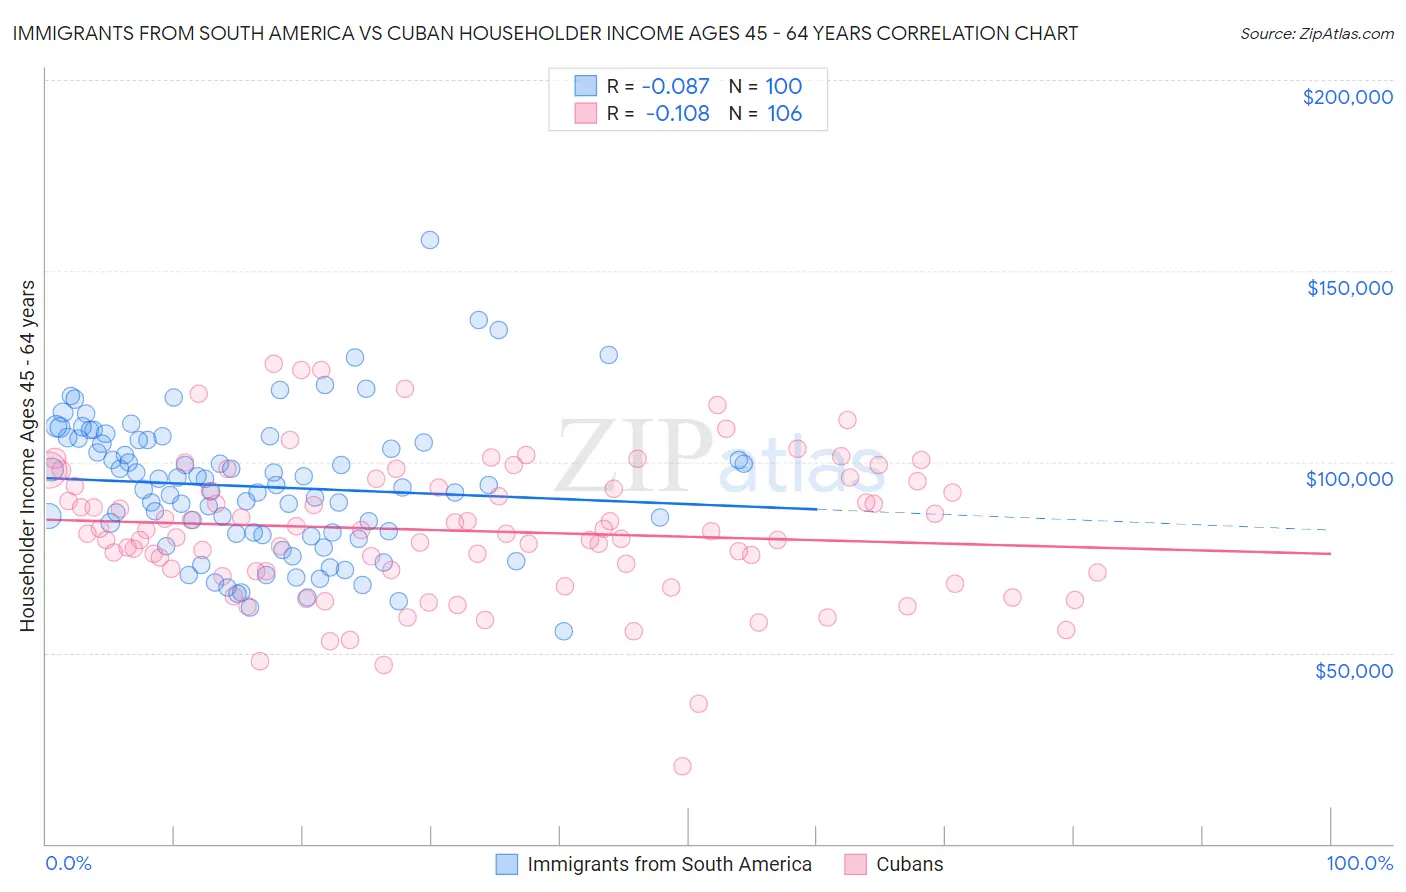 Immigrants from South America vs Cuban Householder Income Ages 45 - 64 years